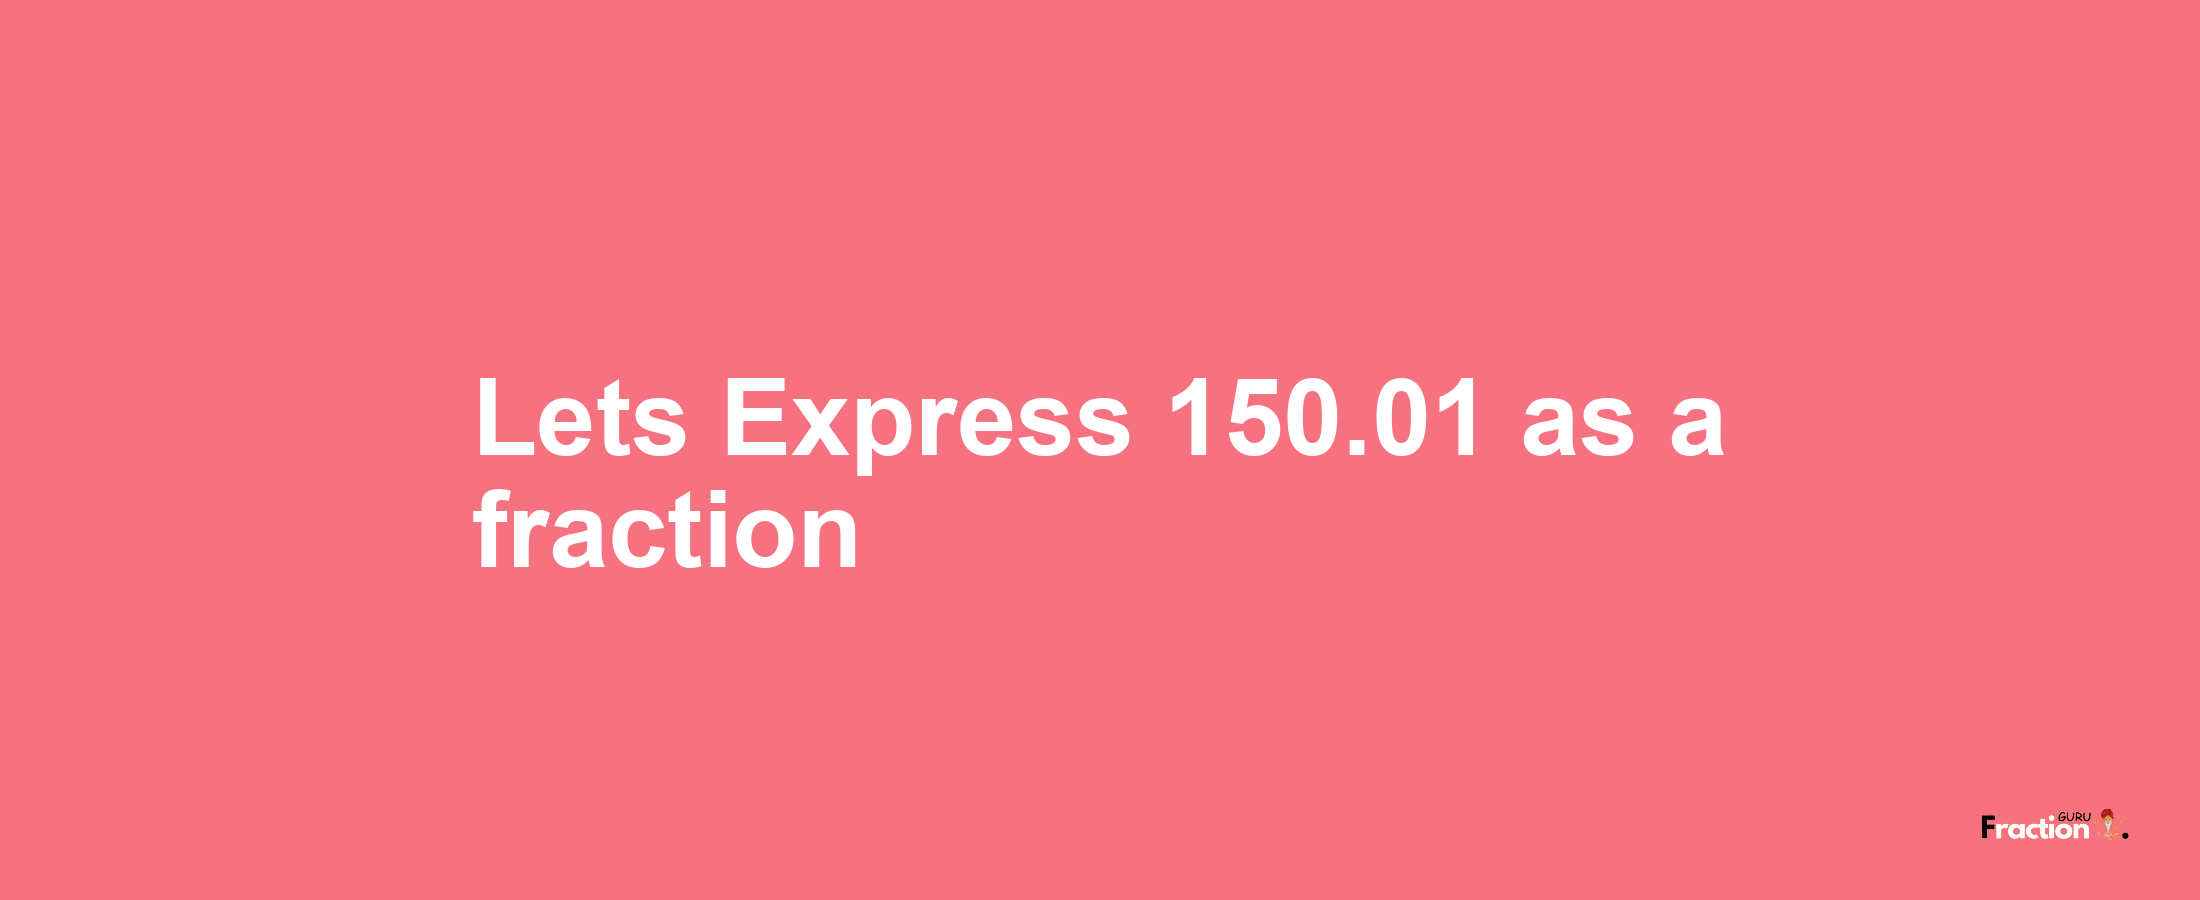 Lets Express 150.01 as afraction